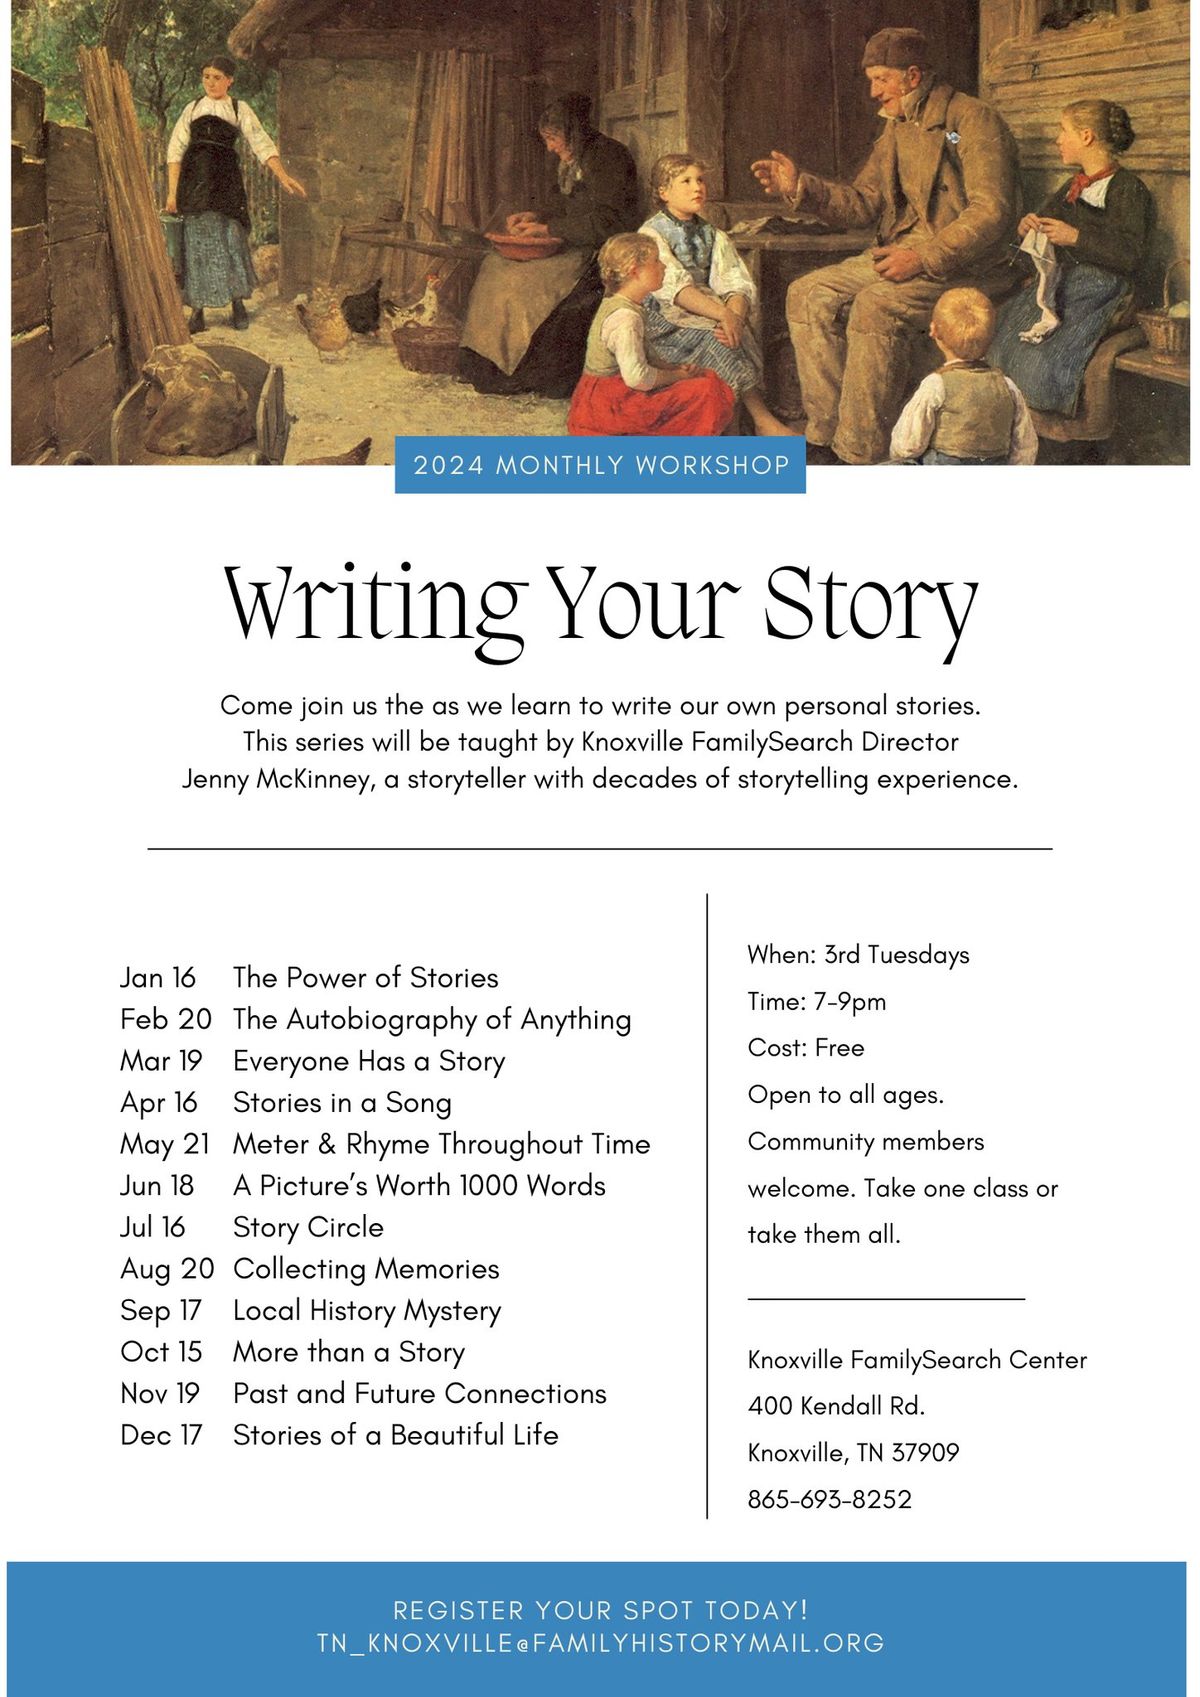 Writing Your Story: Meter and Rhyme Throughout Time